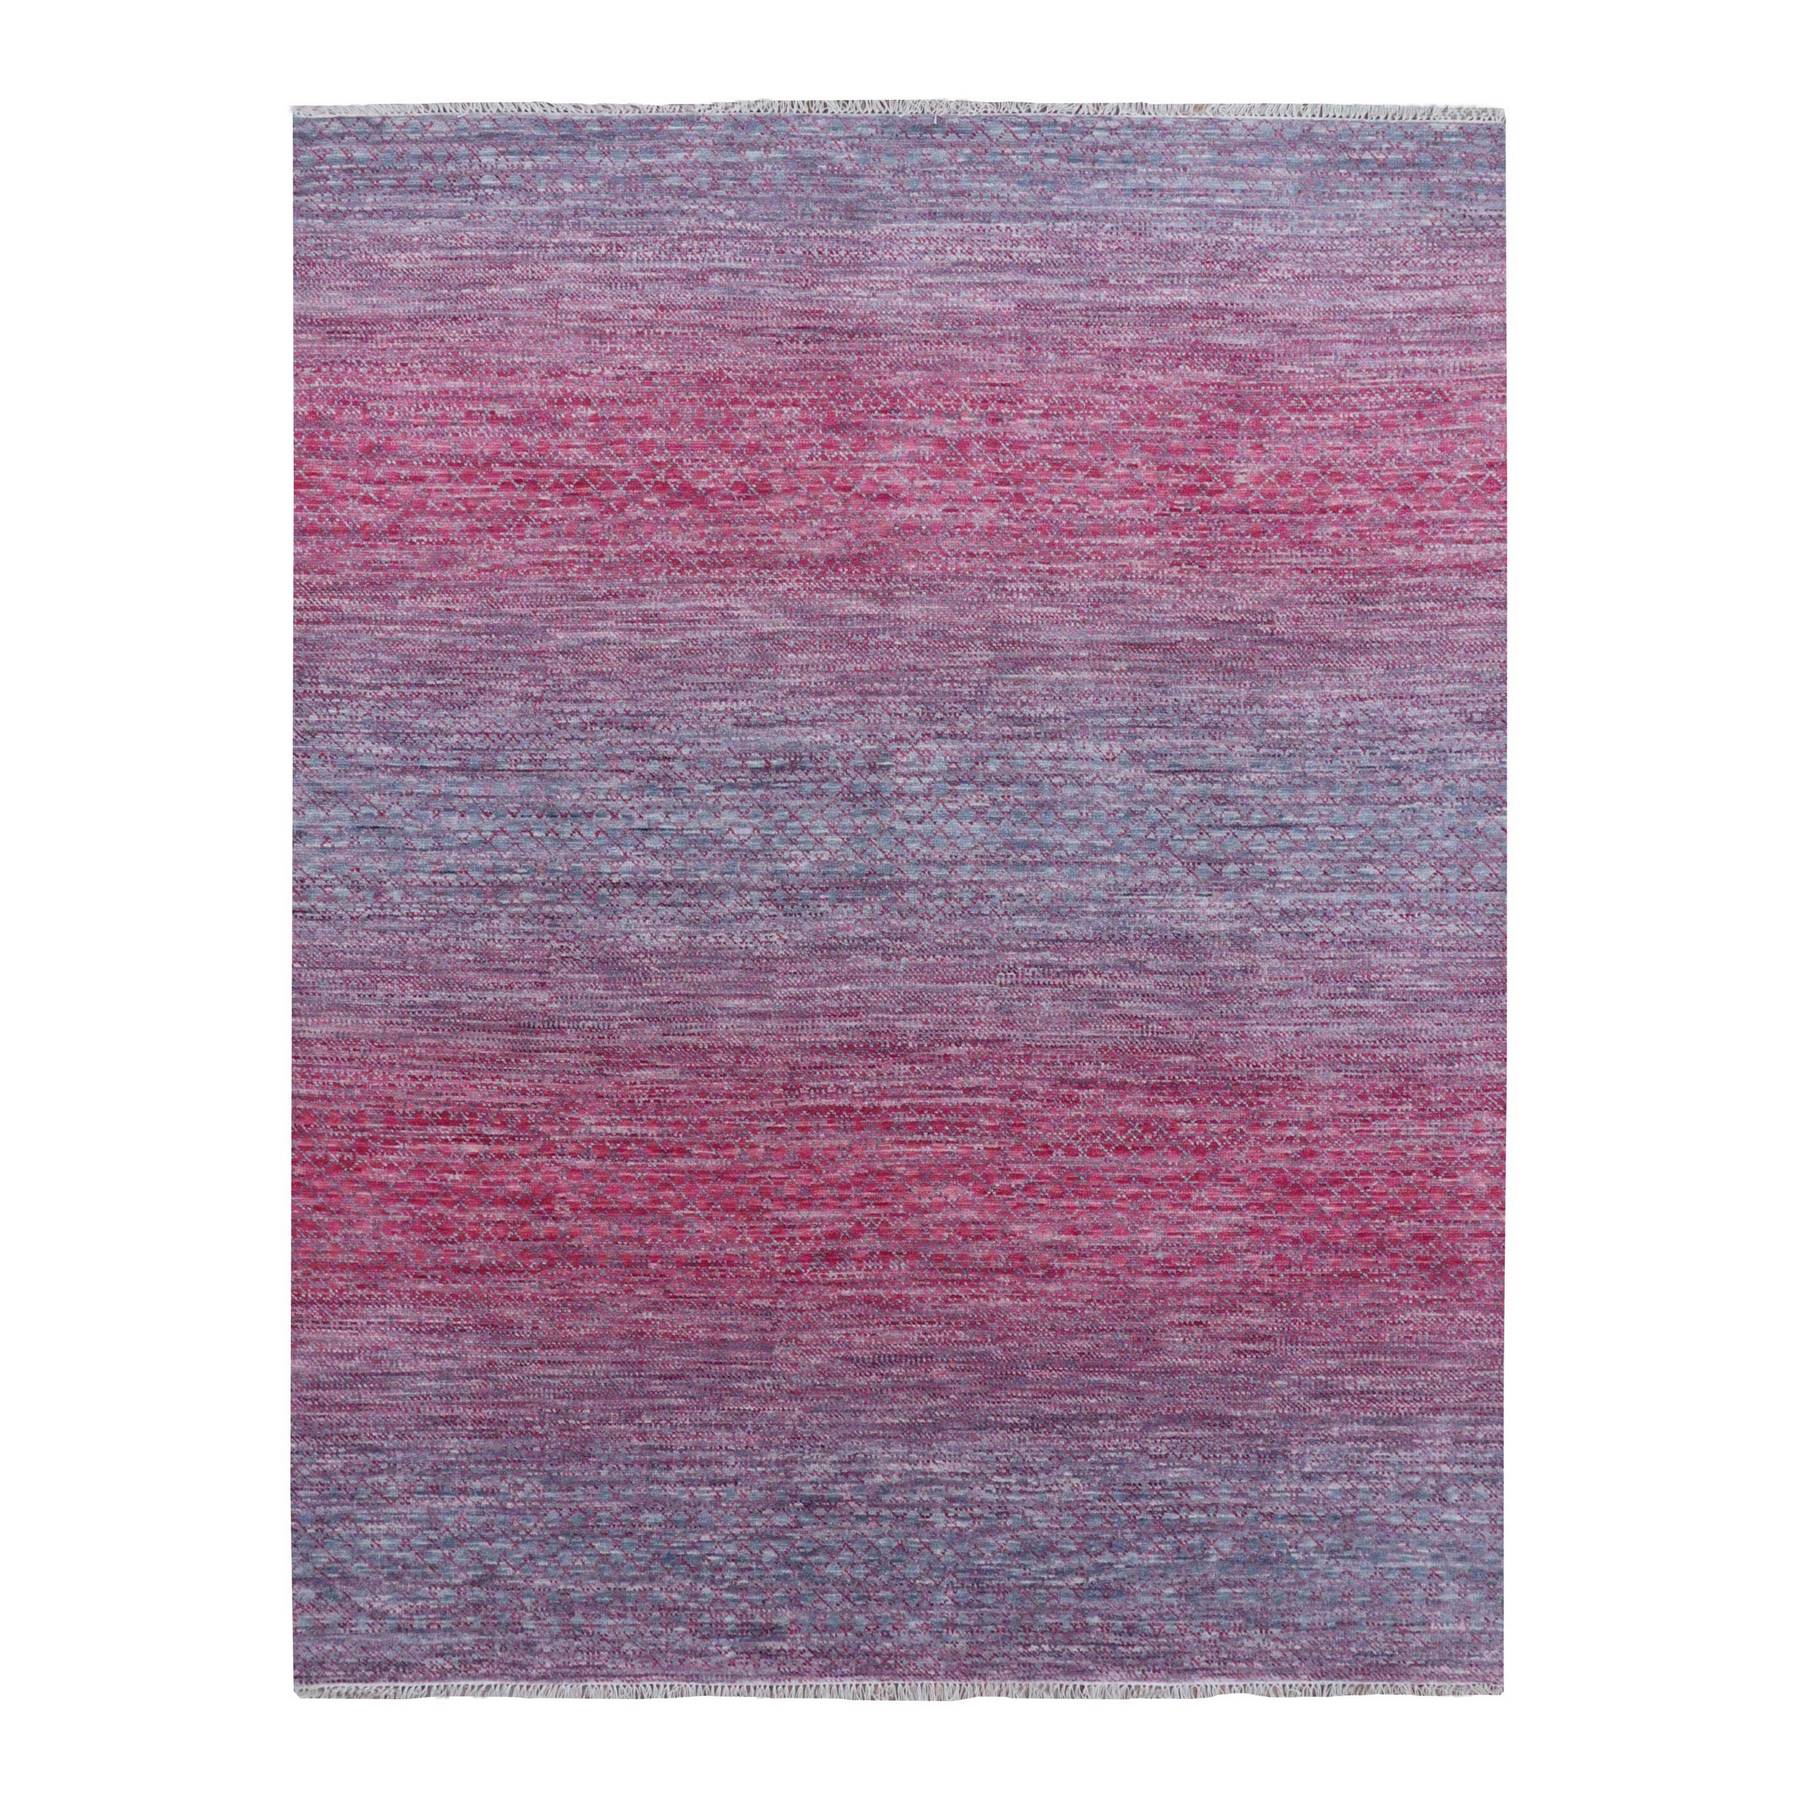 8'1"x10'1" Rose Red, Pure Wool Hand Woven, Modern Chiaroscuro Collection Thick and Plush, Oriental Rug 